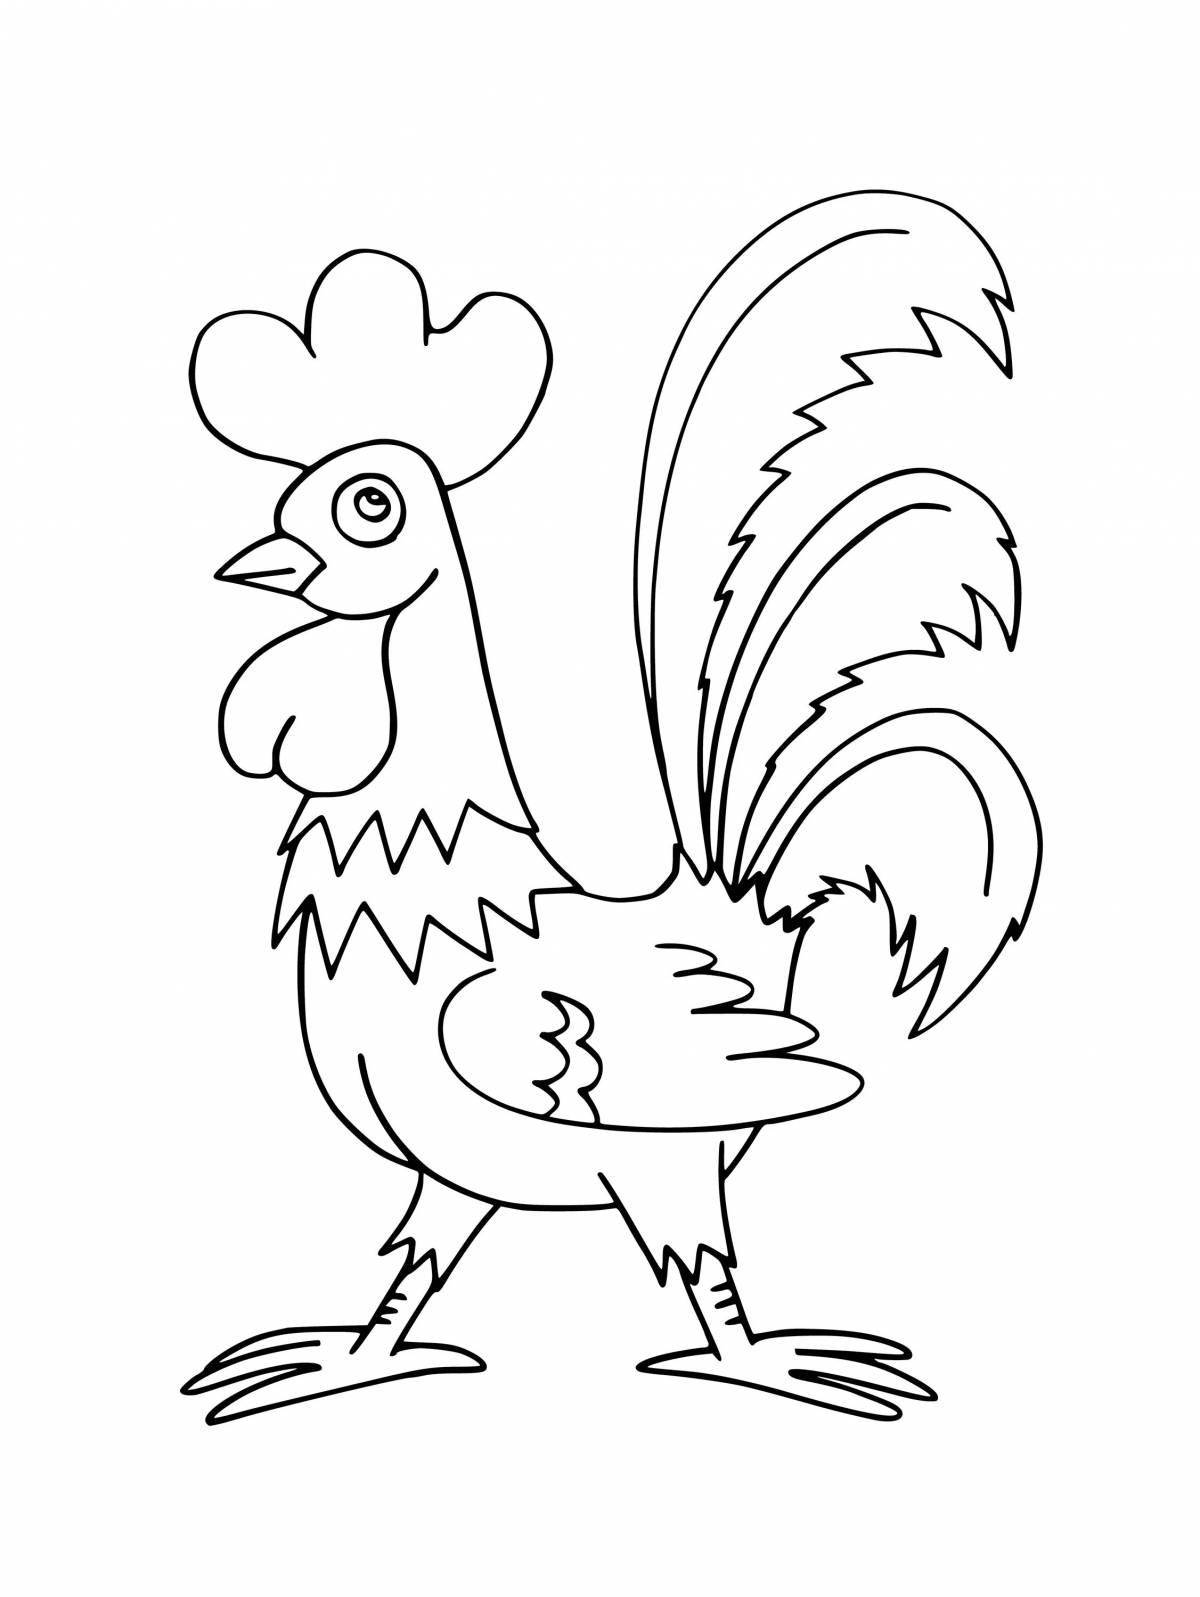 Colorful and joyful drawing of a cockerel for children